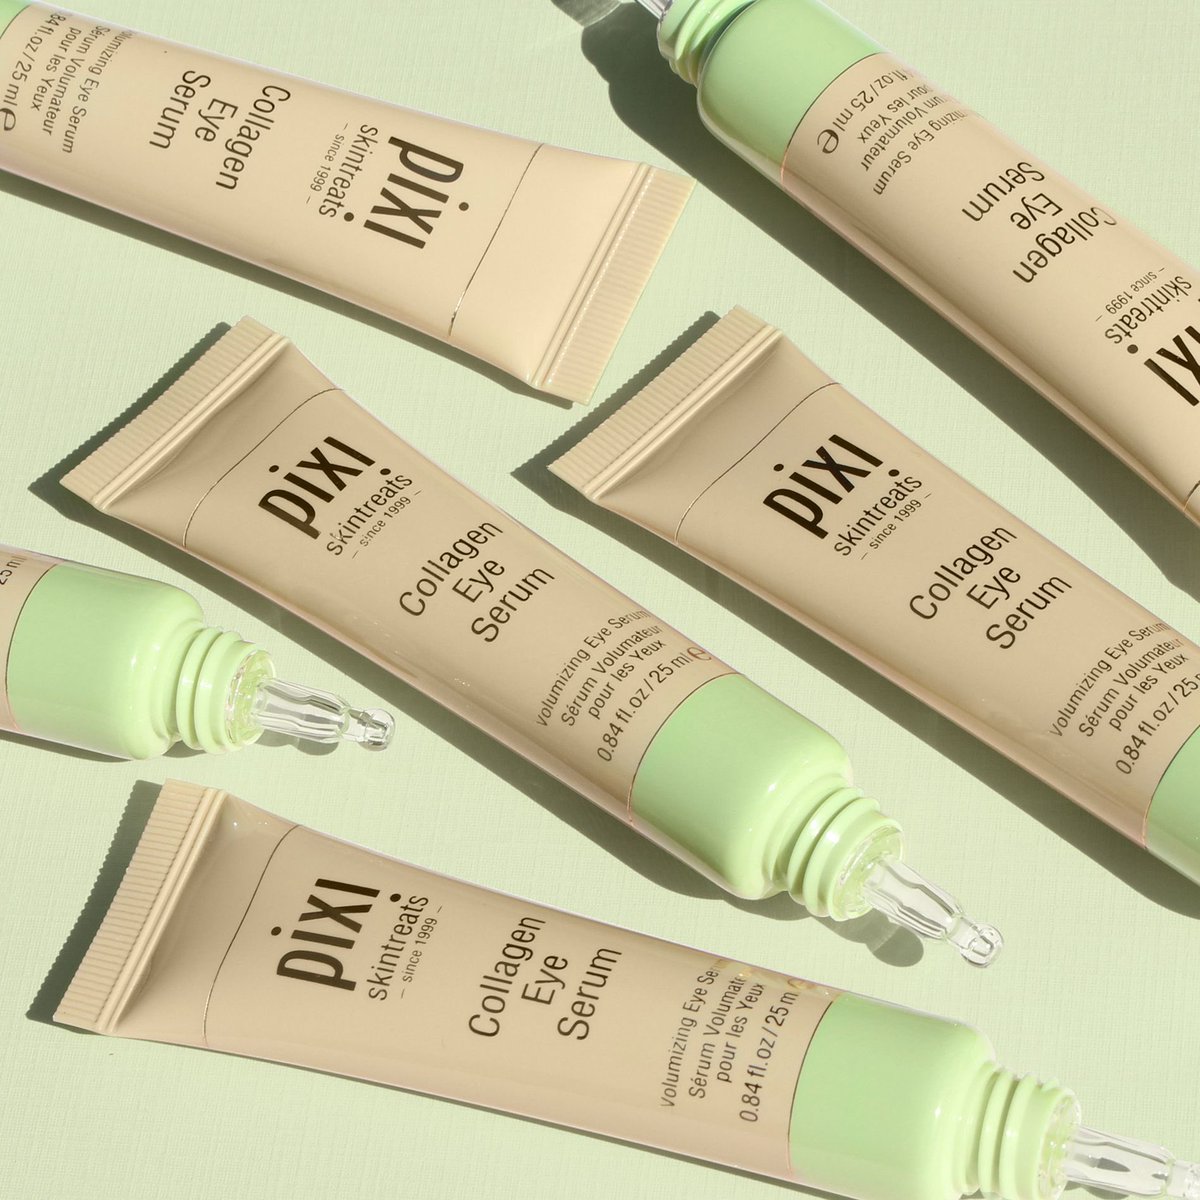 .@PIXIBeauty Collagen Eye Serum is formulated to help boost collagen levels to restore and revitalize the delicate skin around the eye area. MRP ₹2,550 Available at all Sephora India stores and online at sephora.nnnow.com.